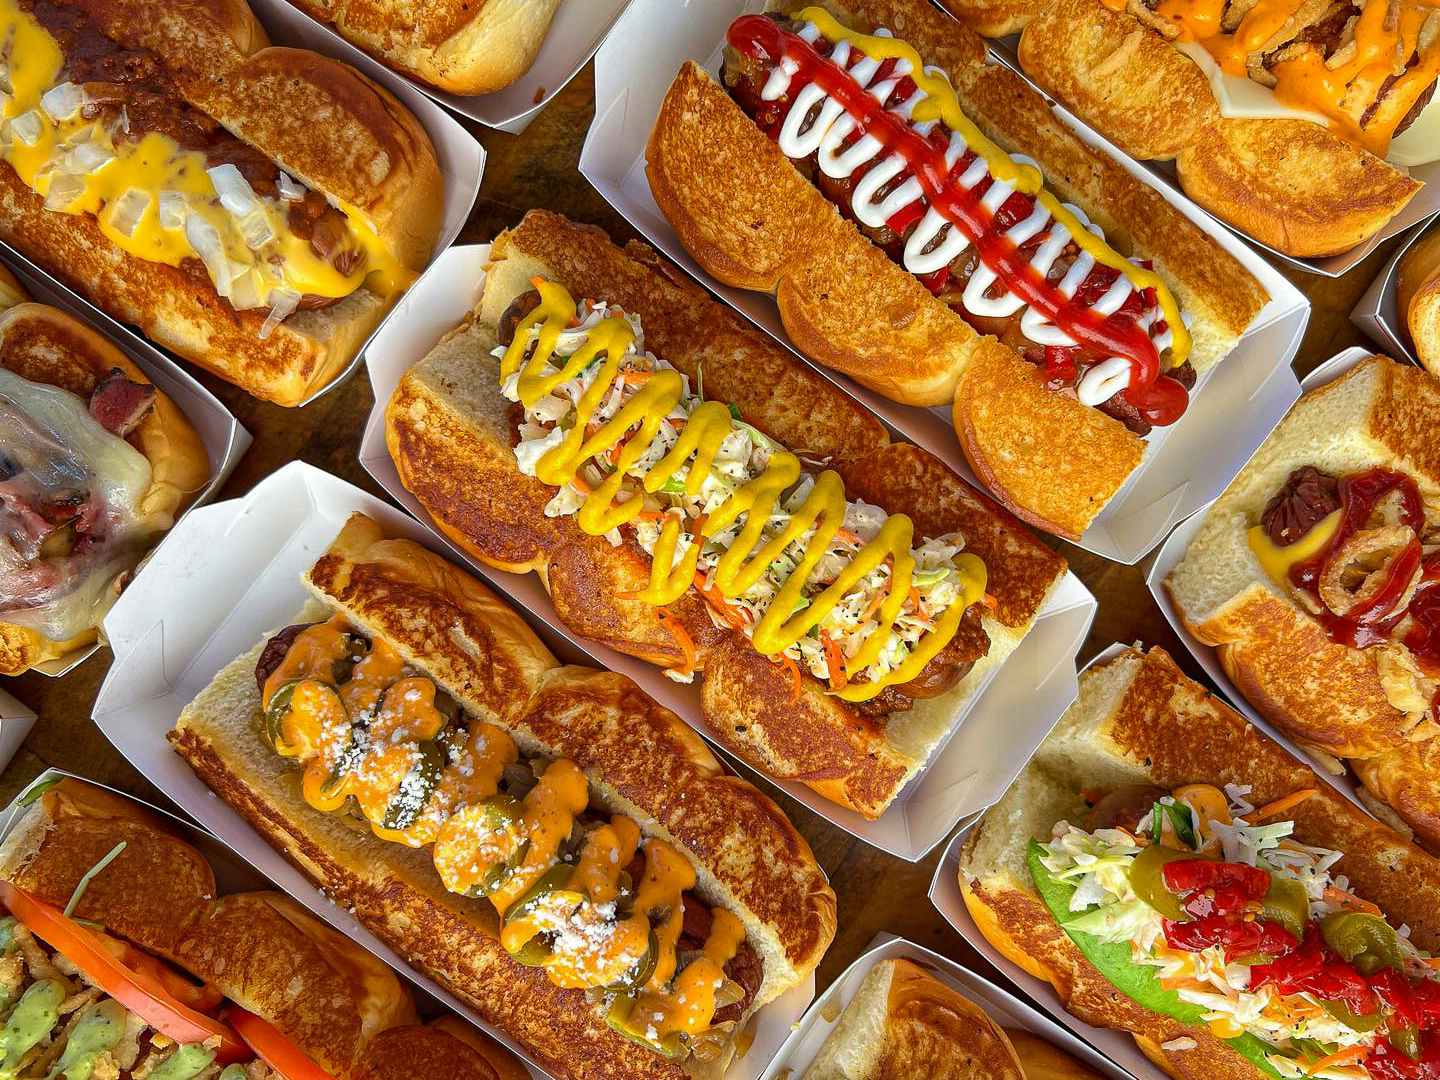 Hot dogs from Dog Haus